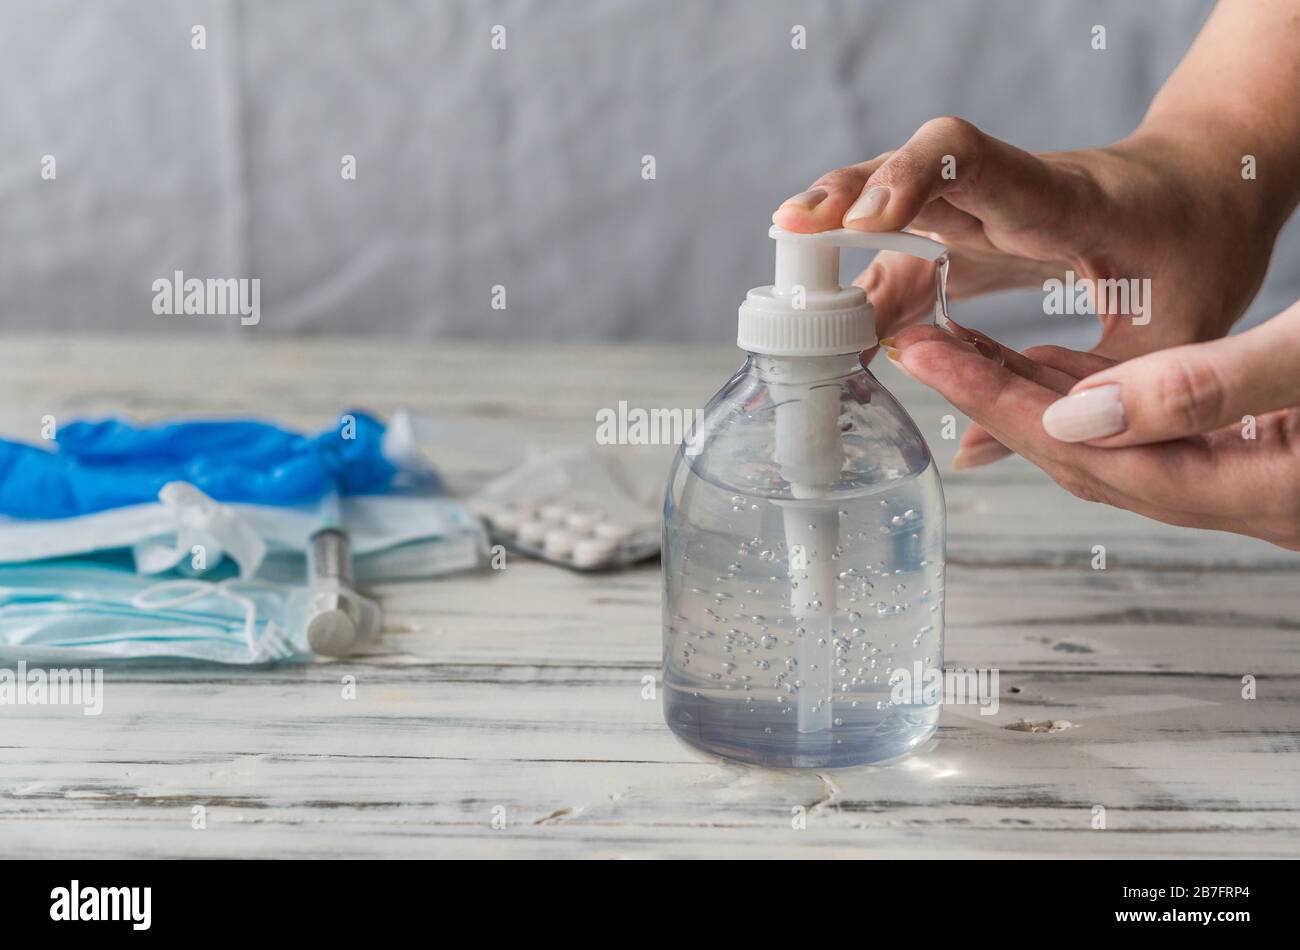 Hand sanitizer gel with alcohol disinfectant for prevention of coronavirus. Stock Photo